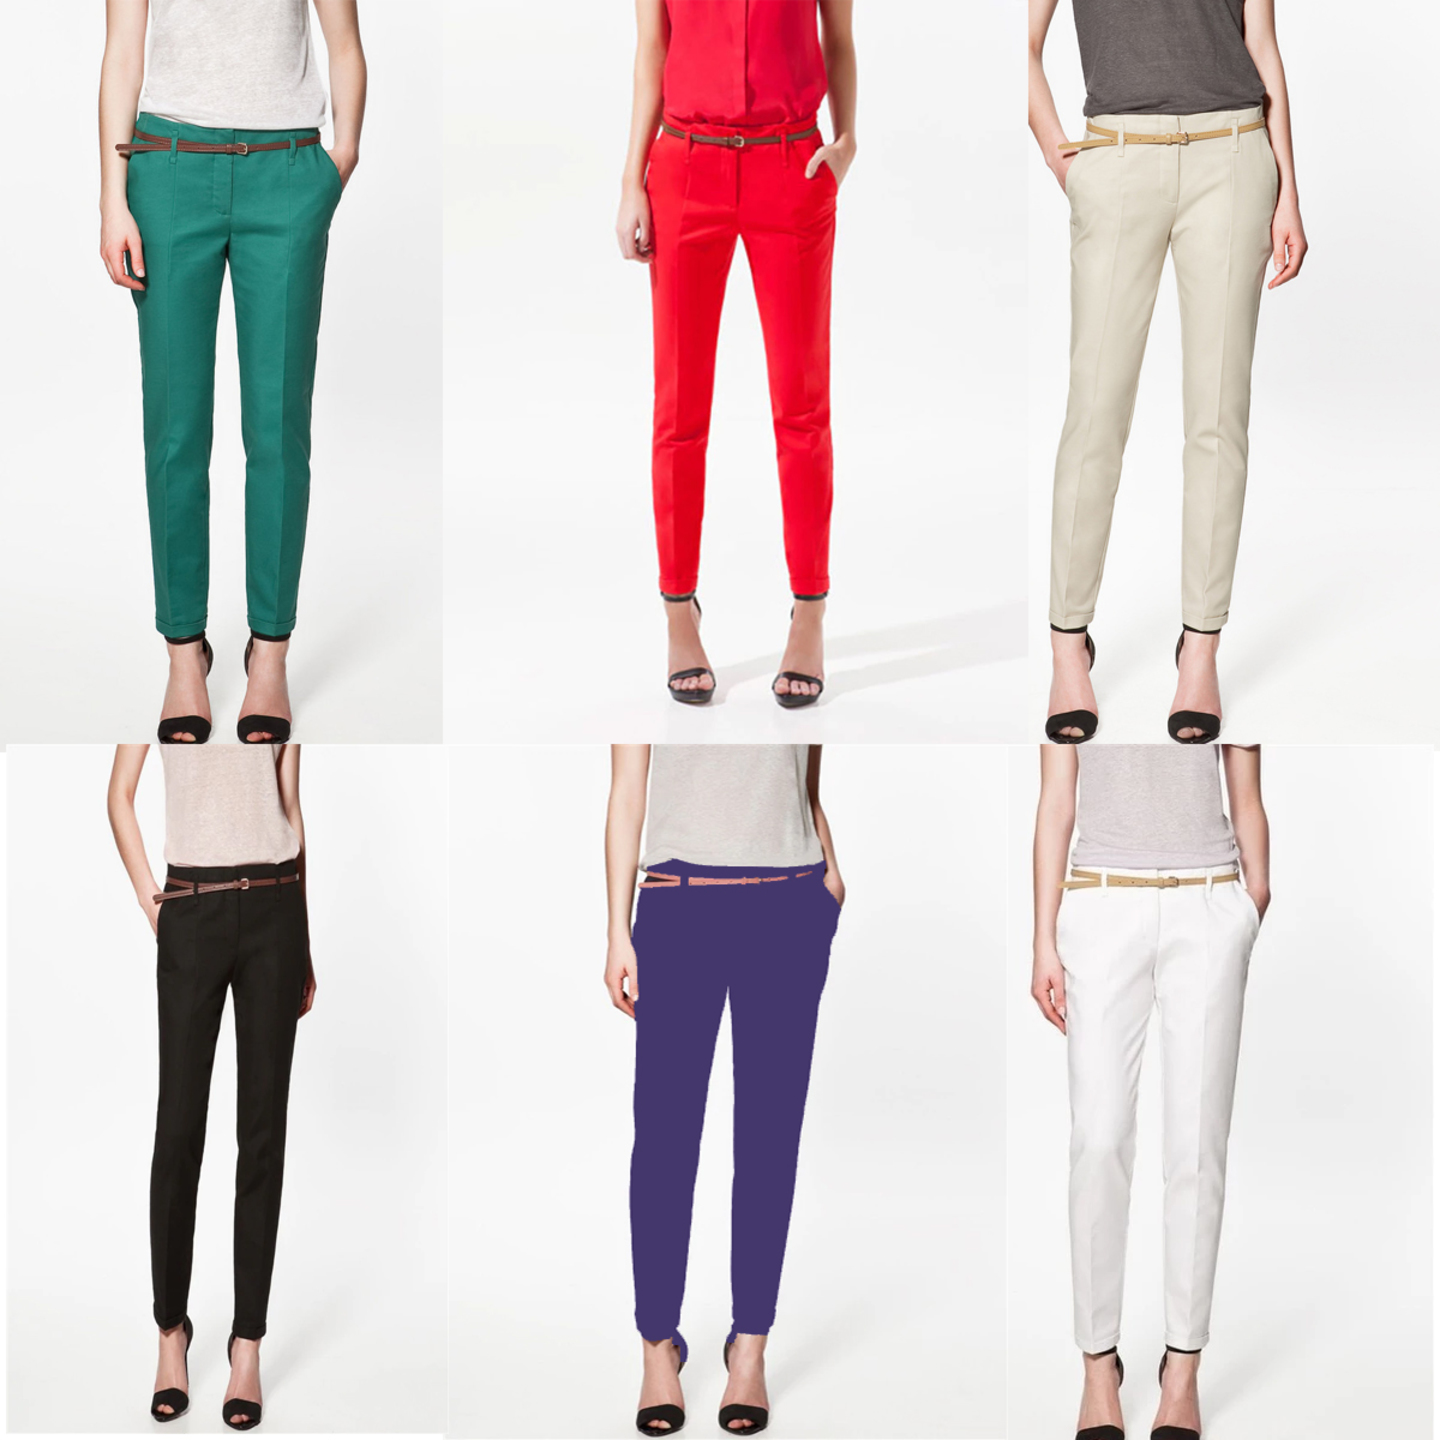 Pencil Casual Pants For Women 